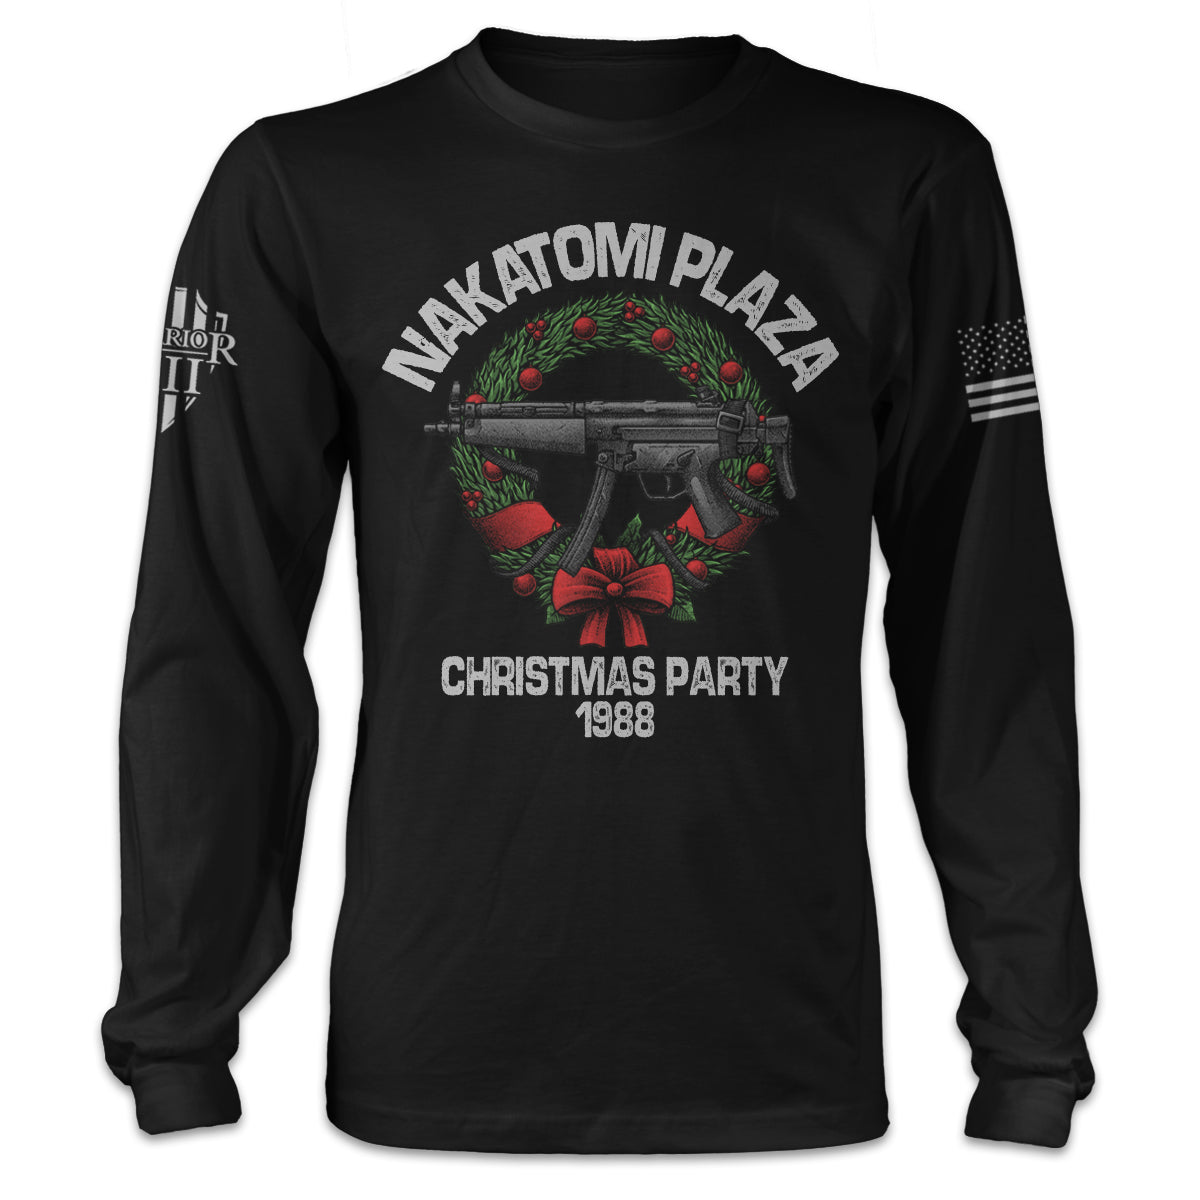 A black long sleeve shirt with the words "Nakatomi Plaza Christmas Party - 1988" with a gun inside a reef printed on the front of the shirt.